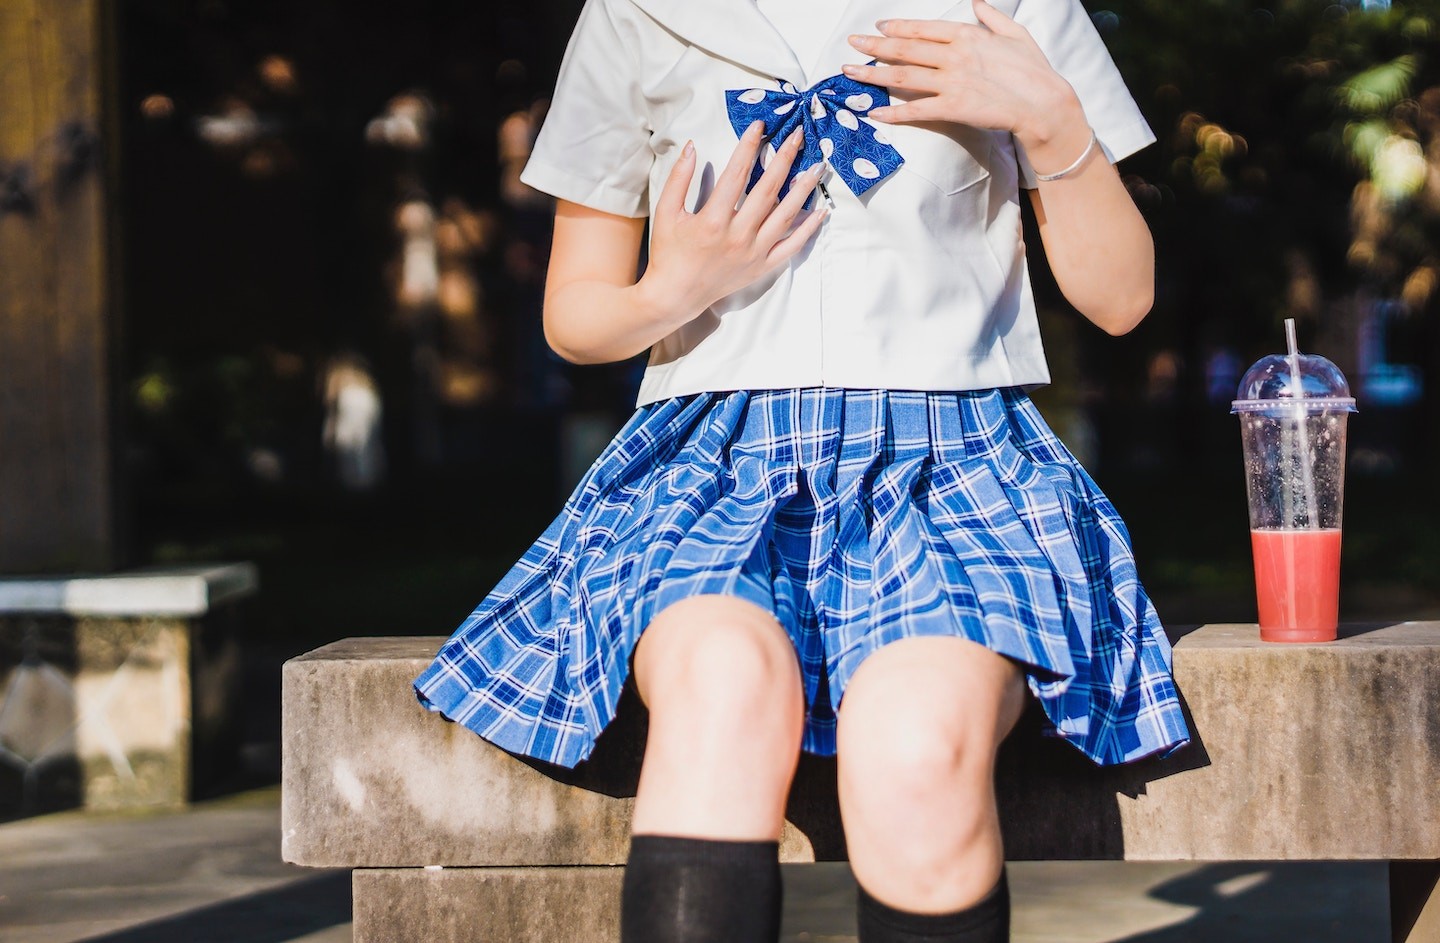 People in Japan Are Buying Air Fresheners That Smell Like 'High School Girls '